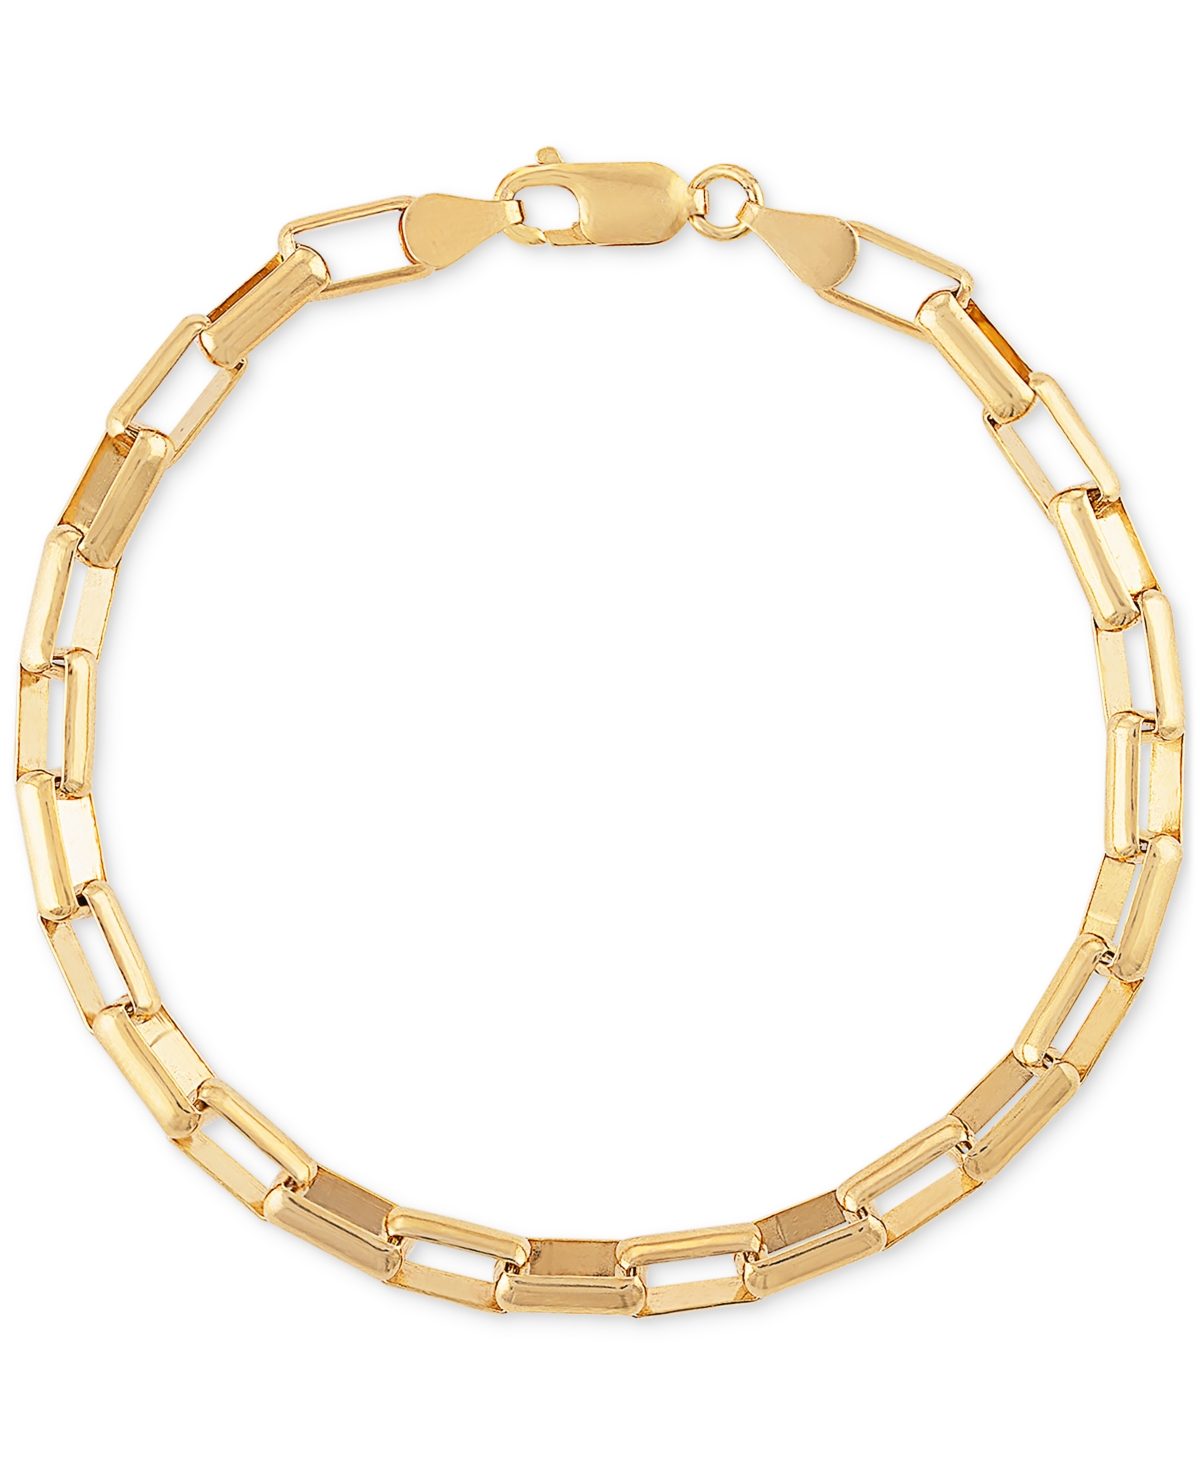 Elongated Box Link Chain Bracelet in 14k Gold-Plated Sterling Silver, Created for Macy's - Gold